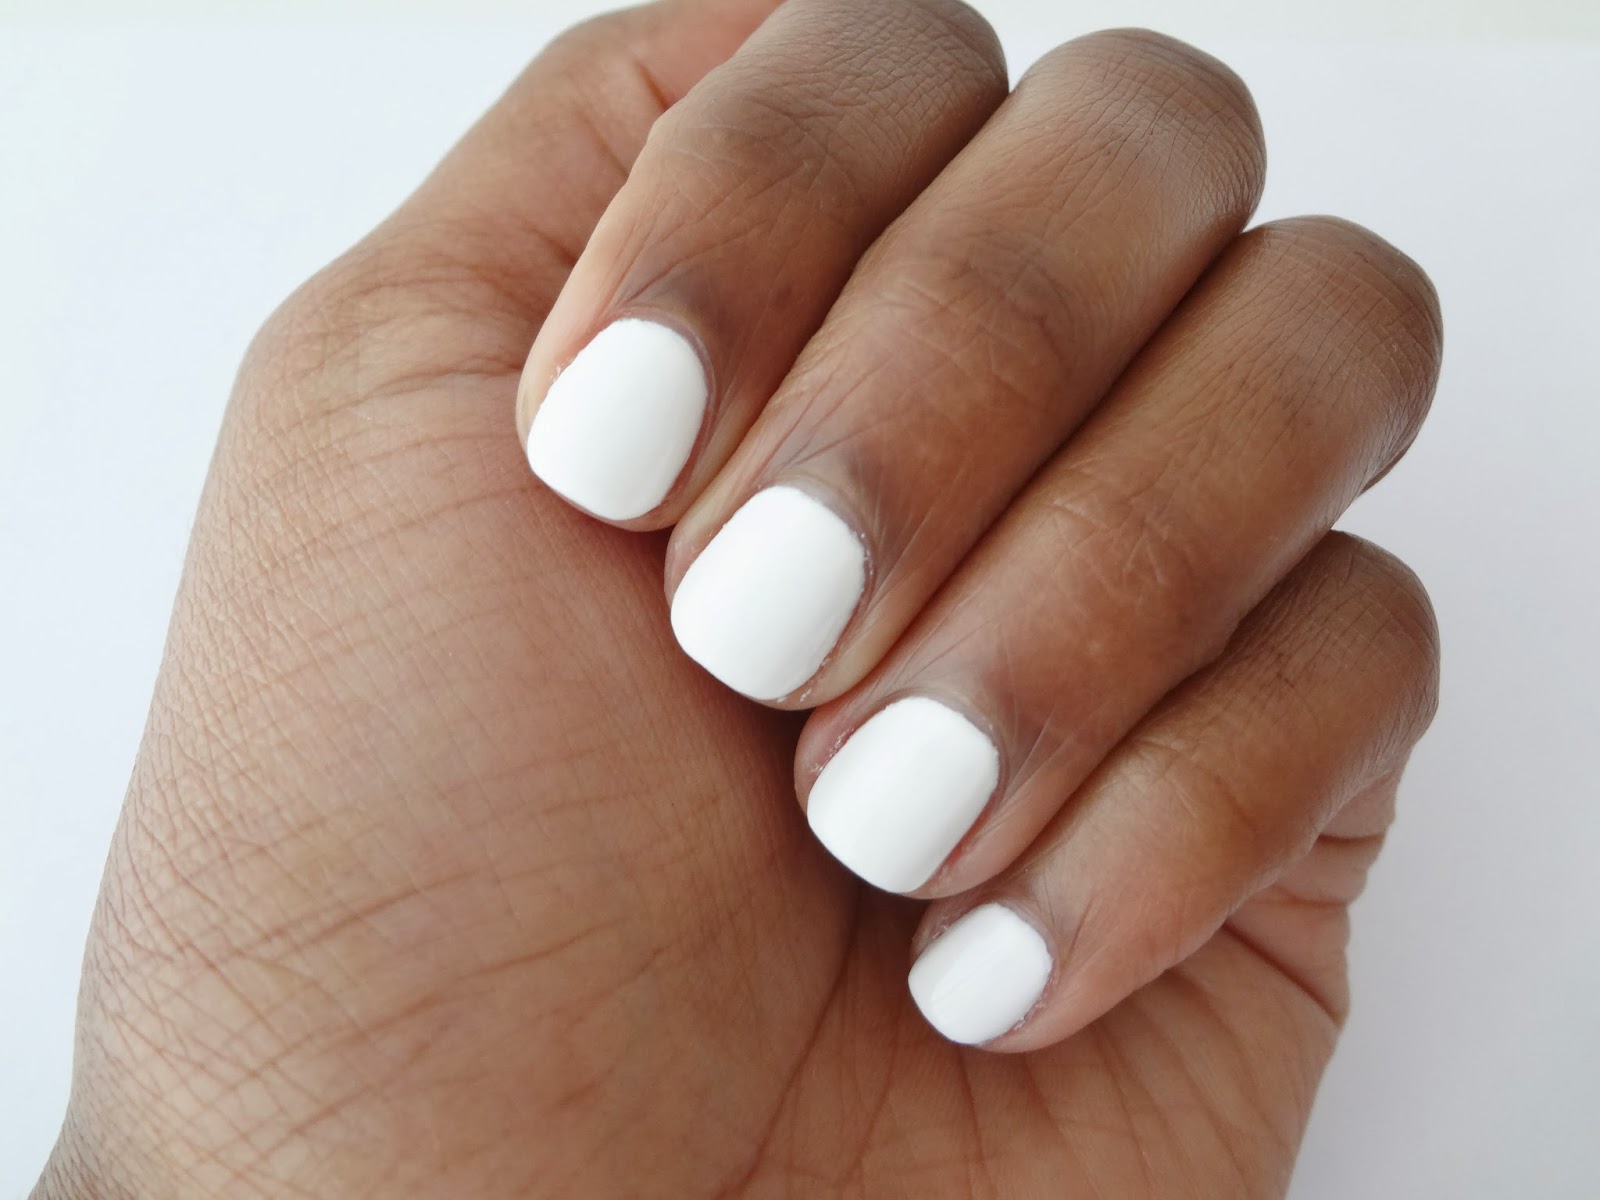 6. OPI Nail Lacquer - Alpine Snow - wide 3